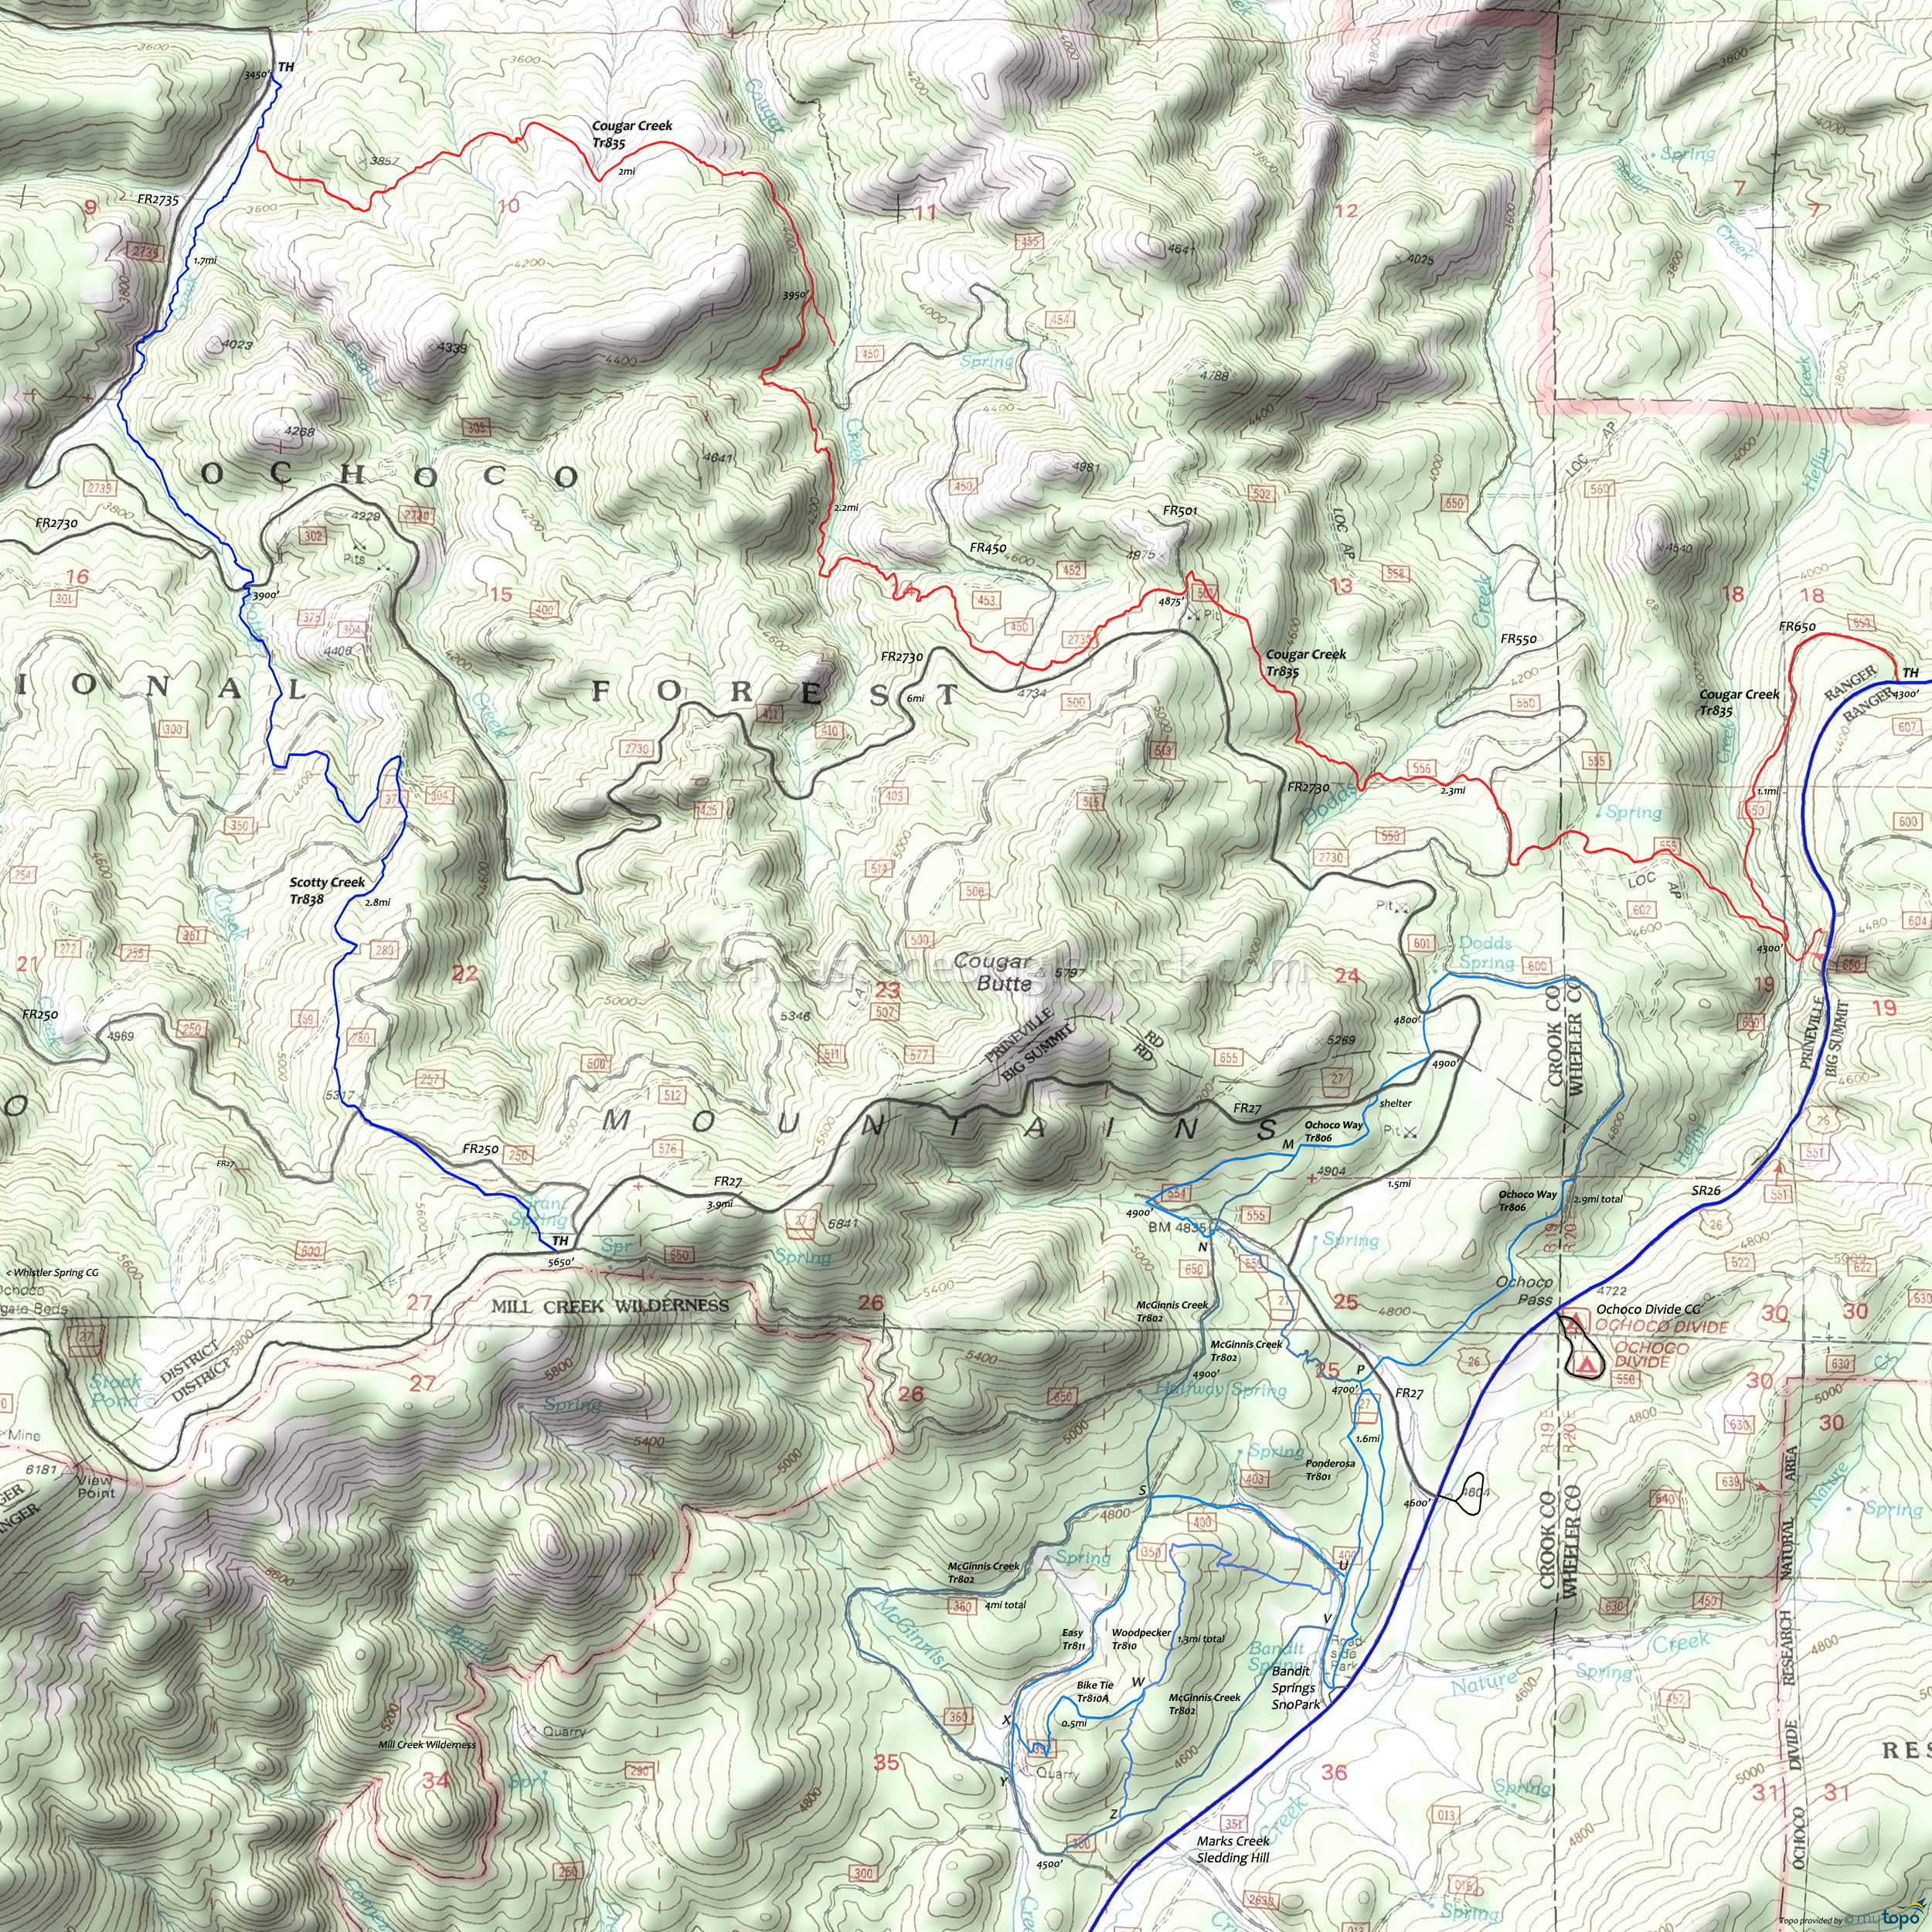 Cougar Creek and Bandit Springs XC Ski Trails Area Topo Map